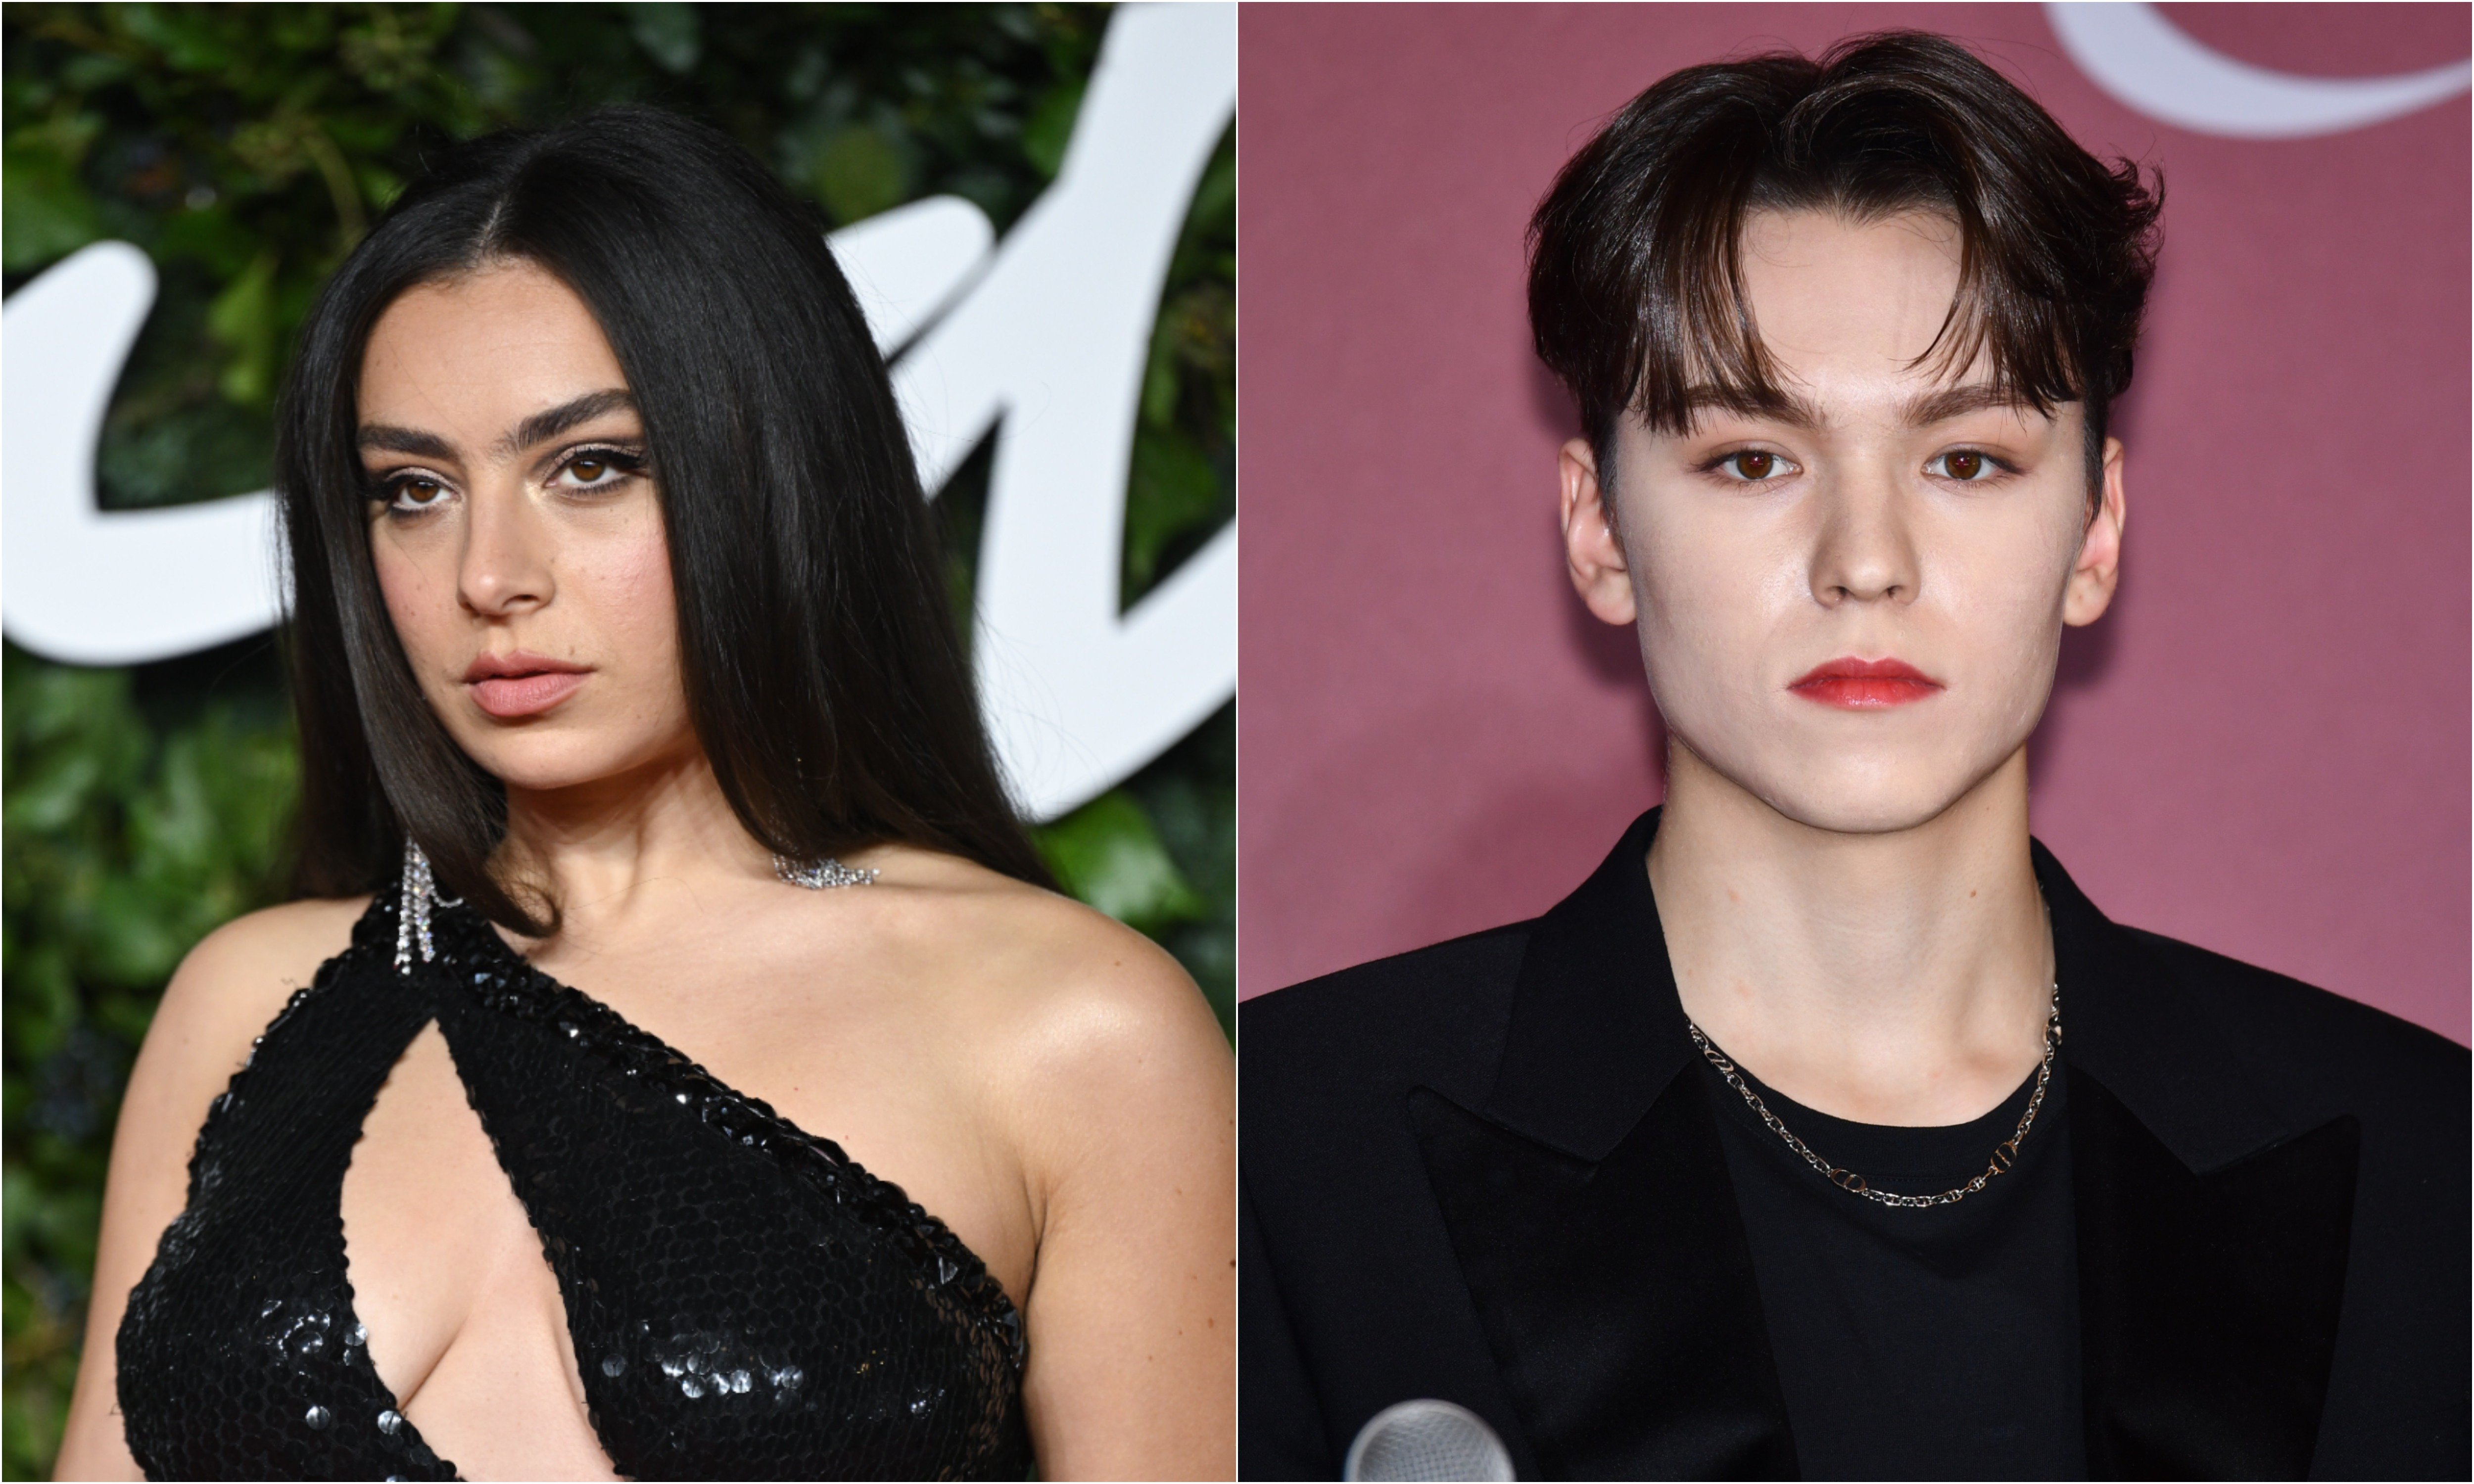 A joined photo of Charli XCX and Seventeen's Vernon